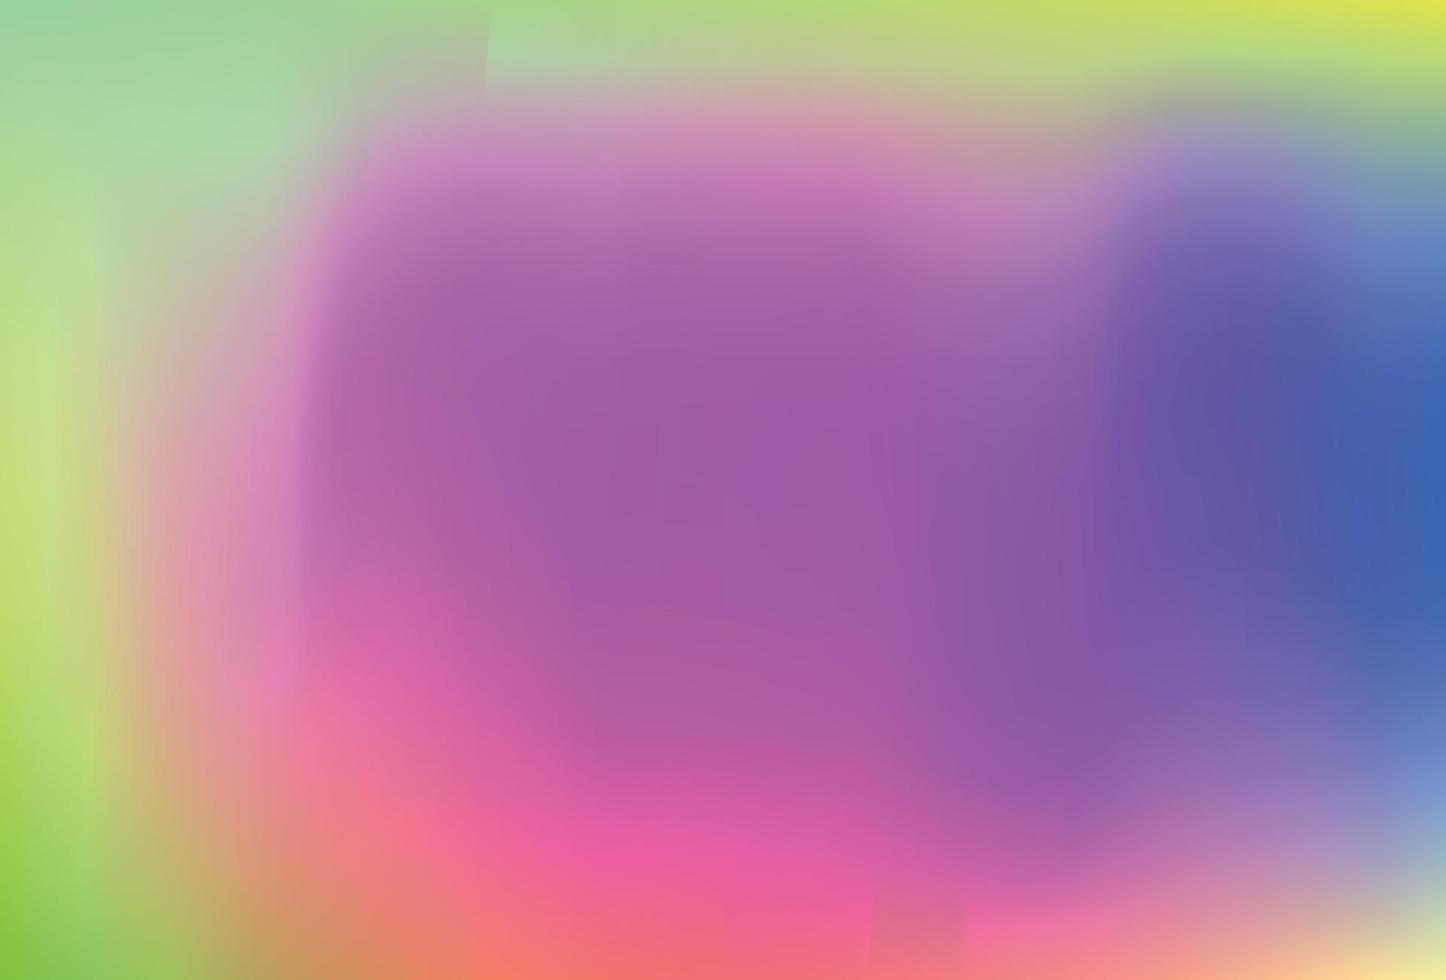 Smooth and blurry colorful gradient mesh drawing. vector